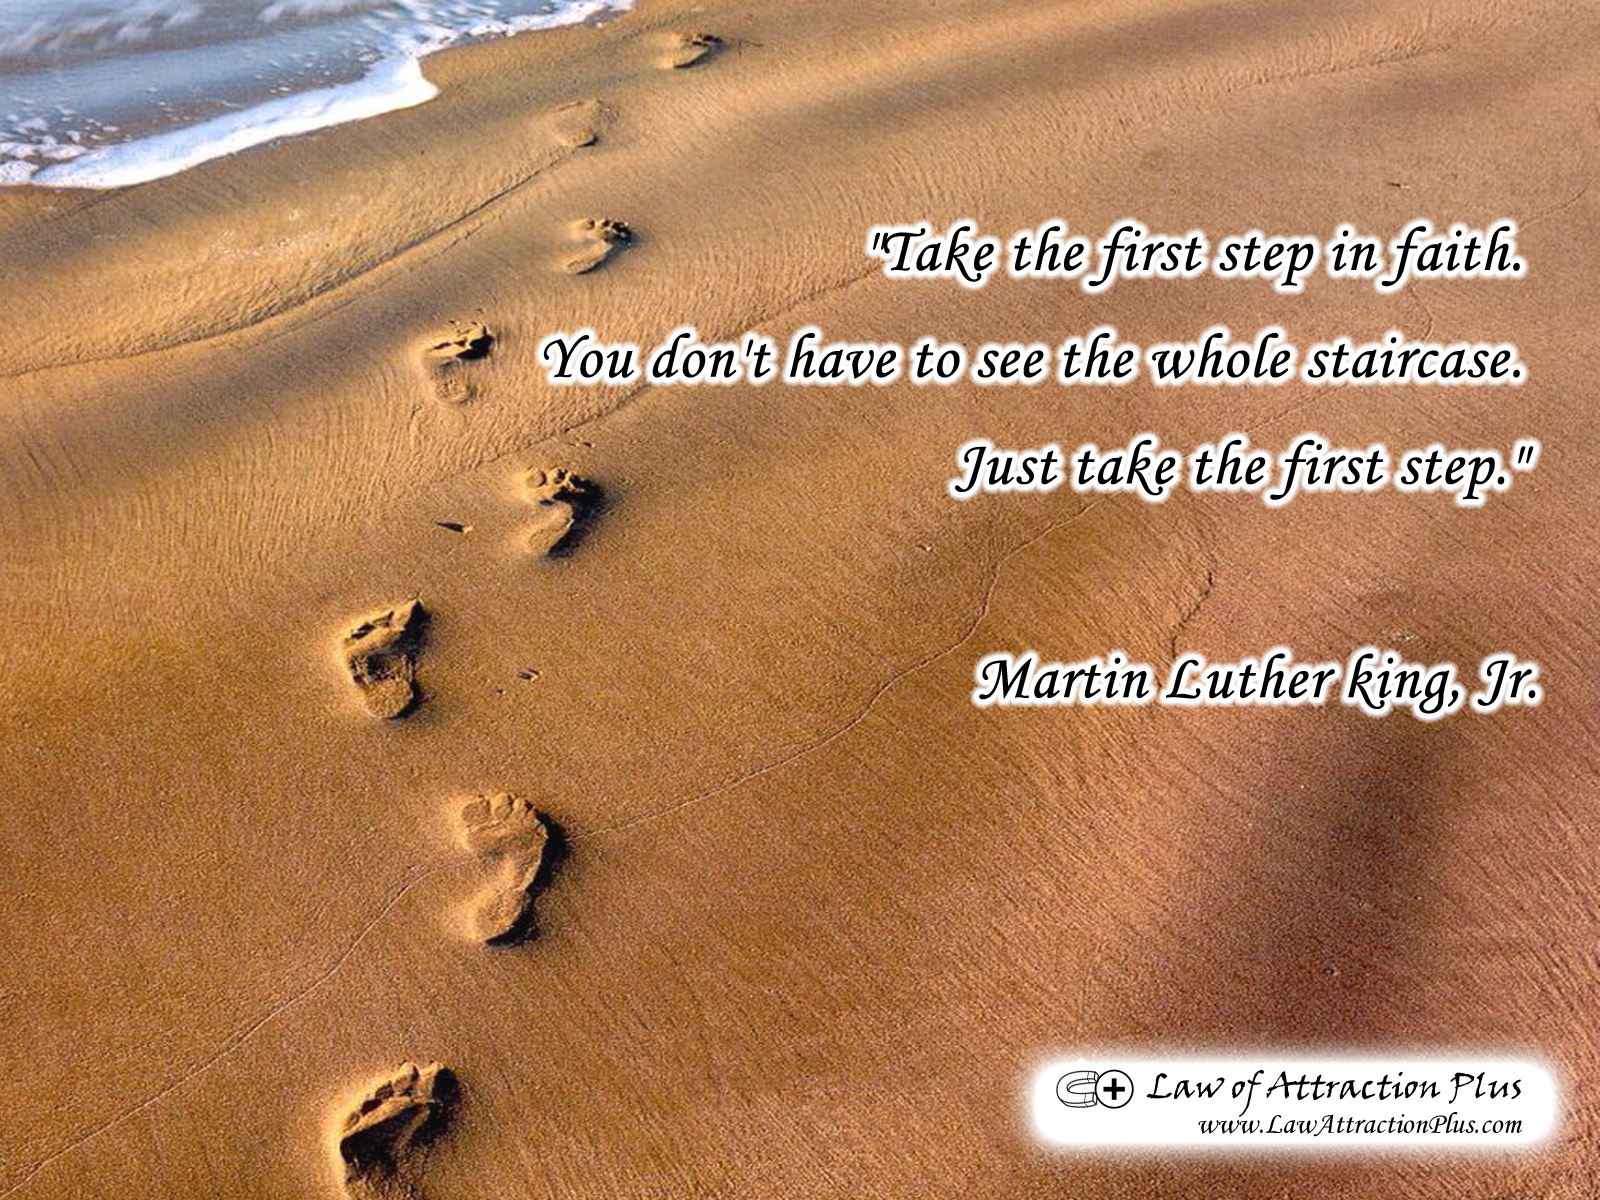 Take The First Step In Faith - Step By Step Quotes Success - HD Wallpaper 